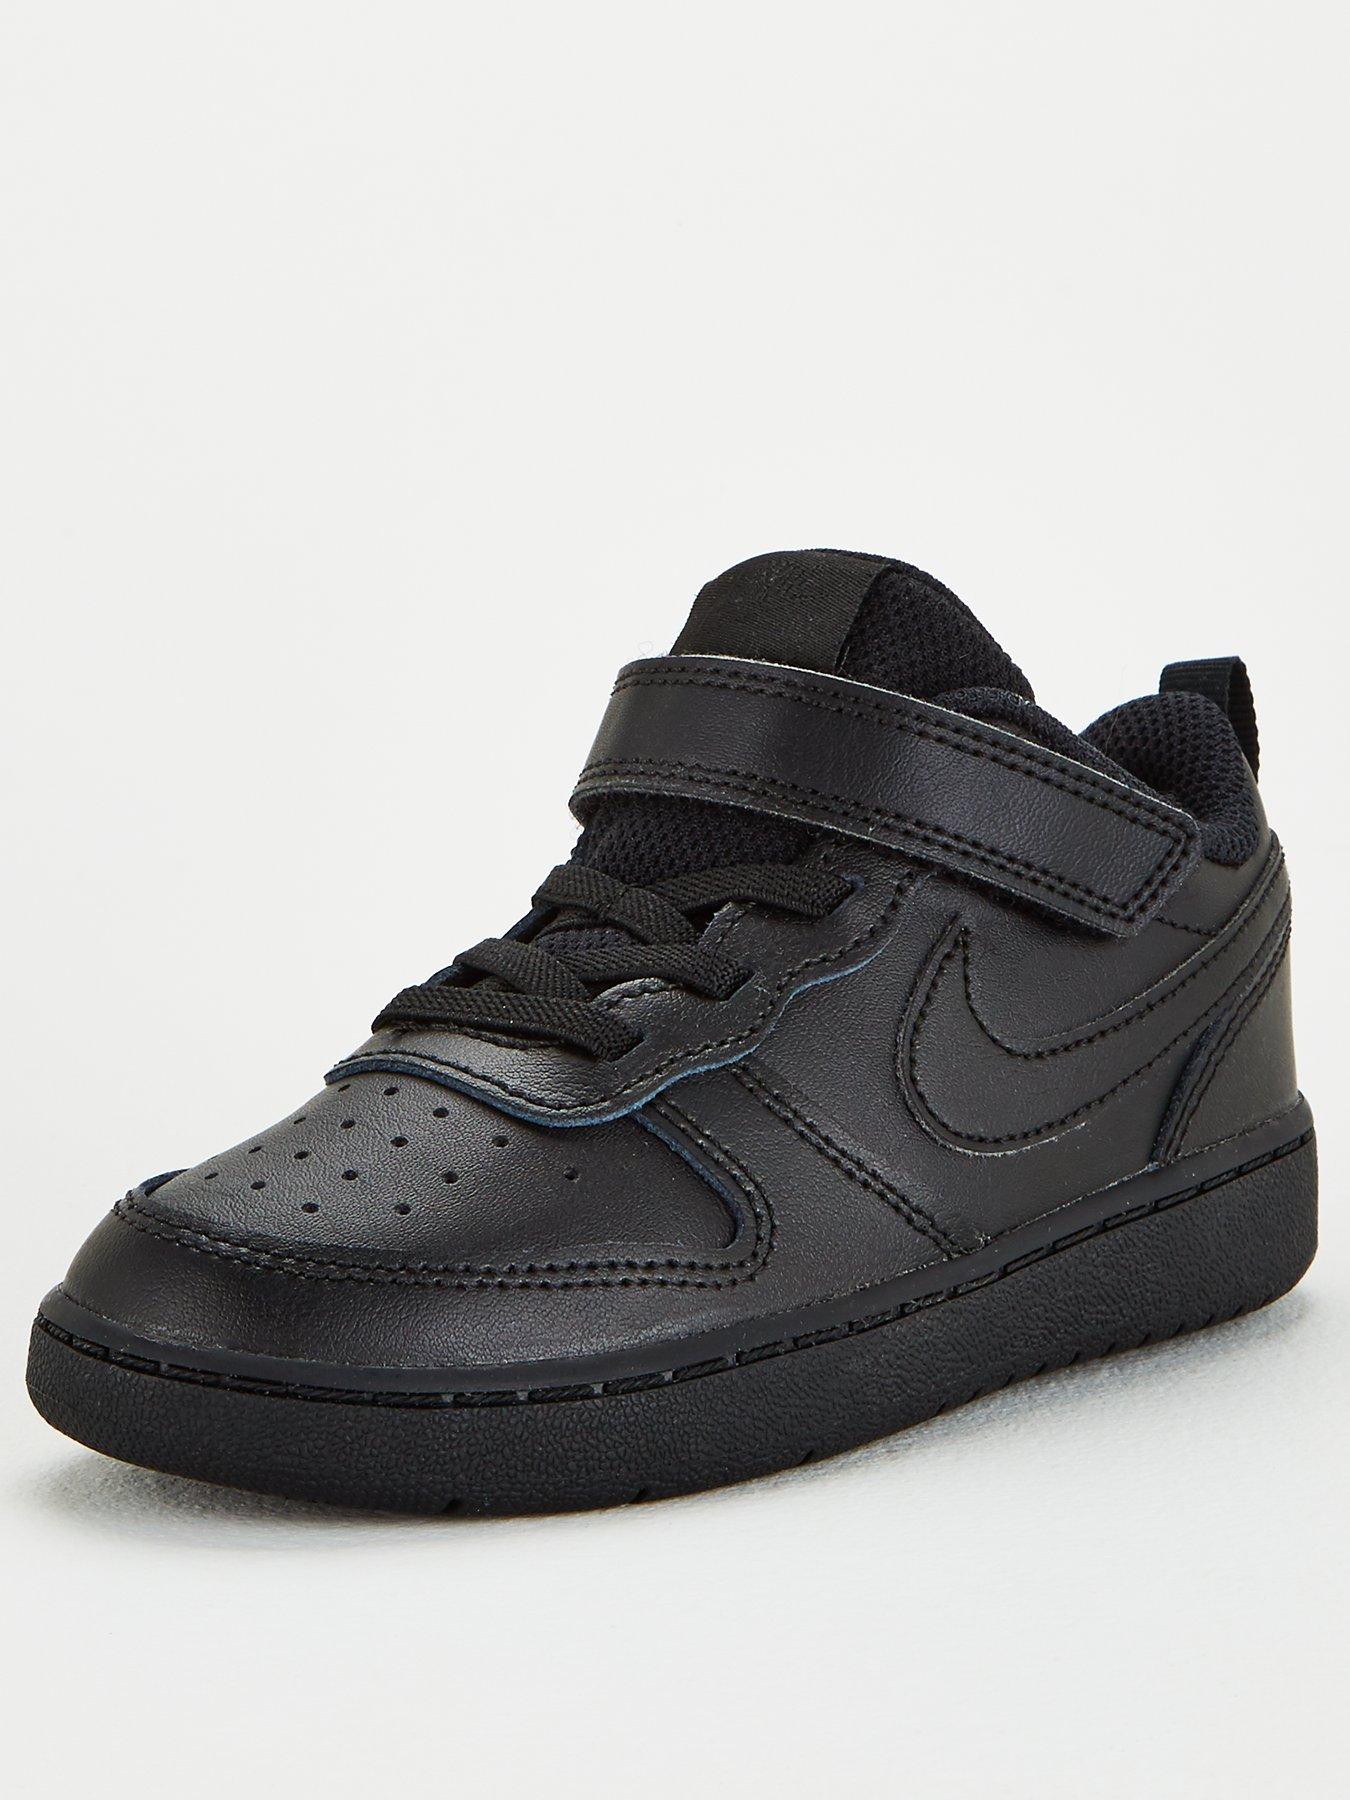  Court Borough Low 2 Toddler Trainers - Black